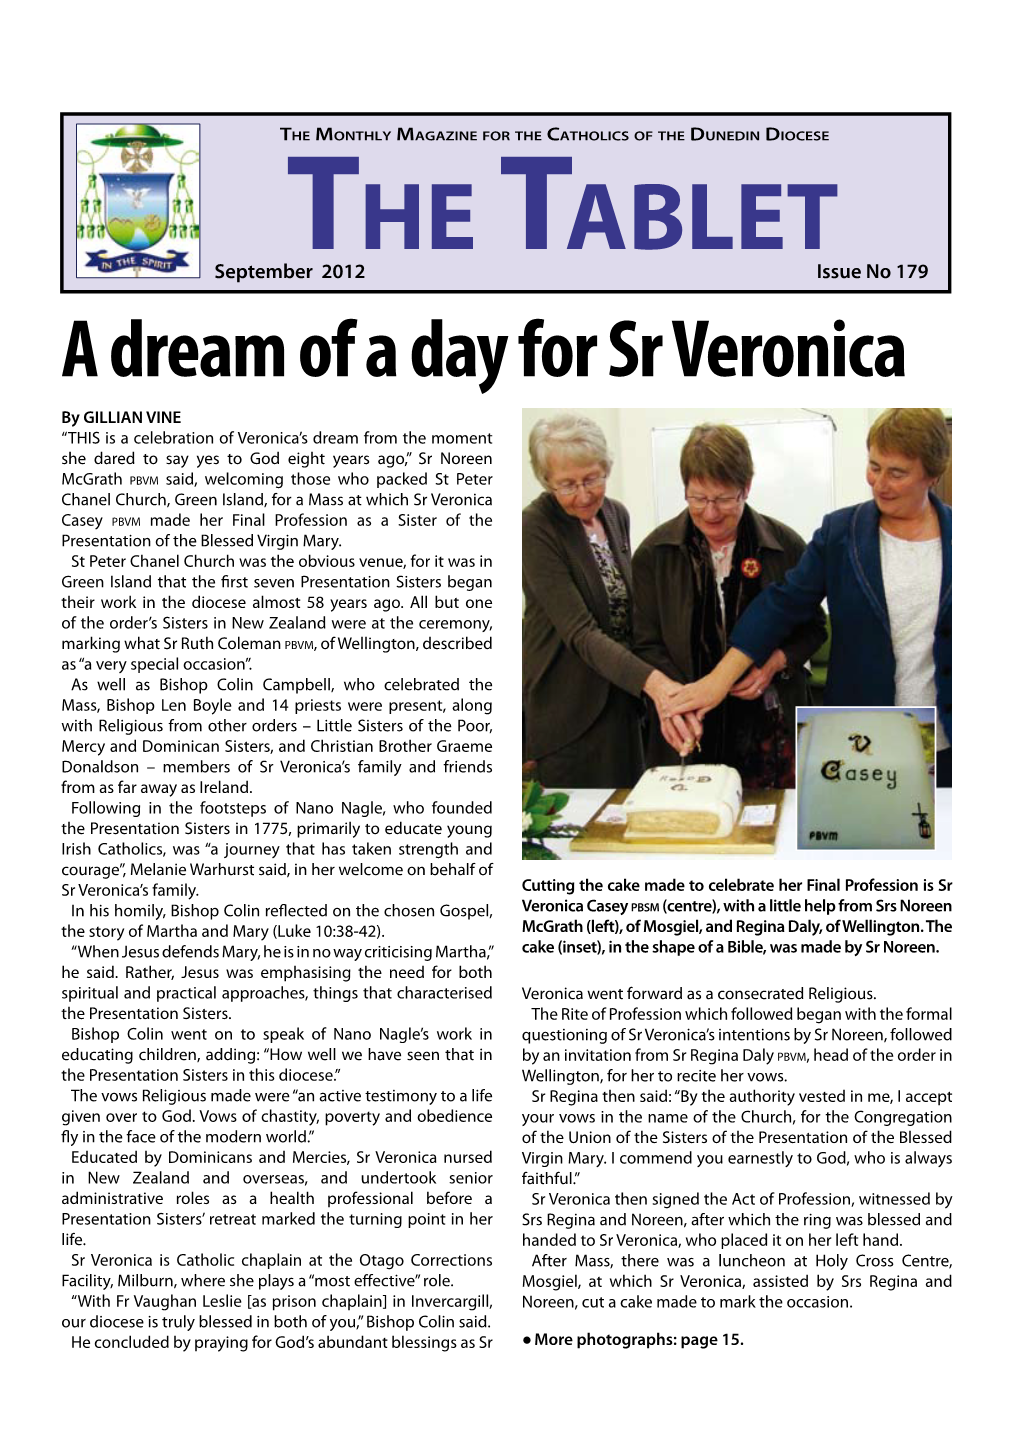 The Tablet September 2012 the Loss of a Loved One Education Conference There Comes a Time Inspires 90-Strong When We All Have to Deal with a Loved One Passing